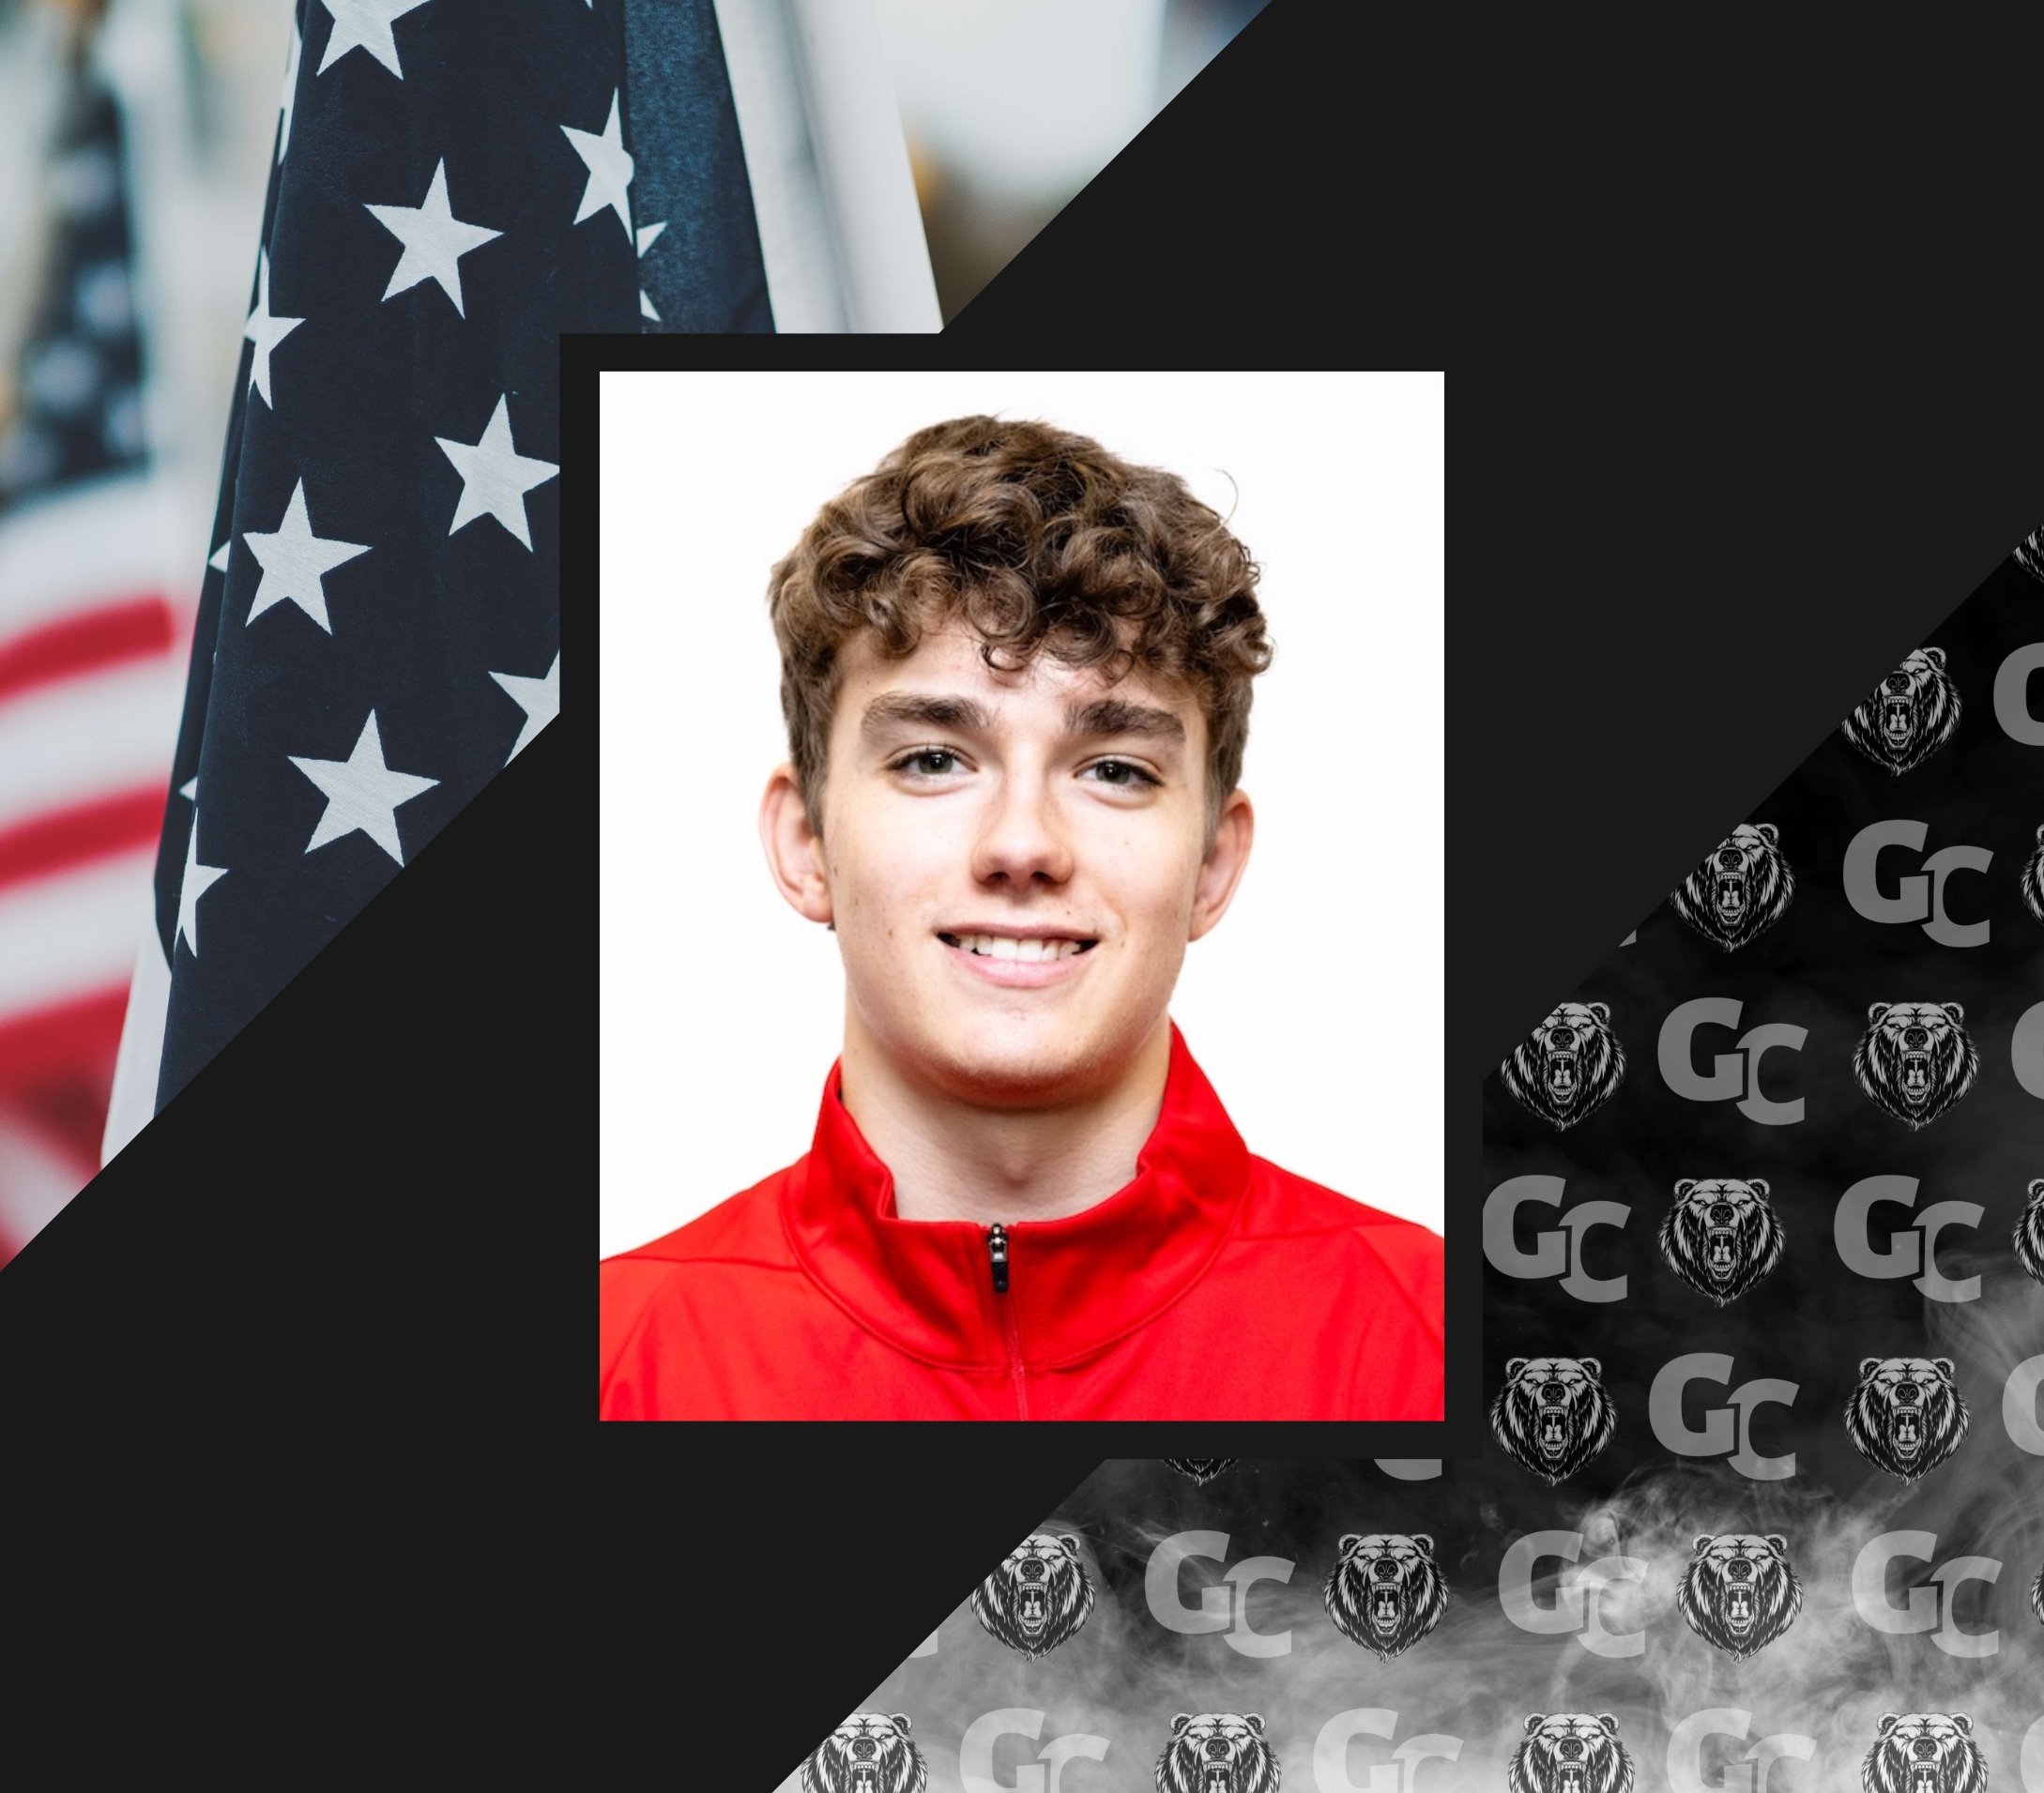 Grant Bowers is a Men's Junior National Team USA athlete competing at the 2024 Grizzly Classic, Canada's biggest Men's Artistic Gymnastics competition and North America's only MAG FIG-sanctioned competition this season.